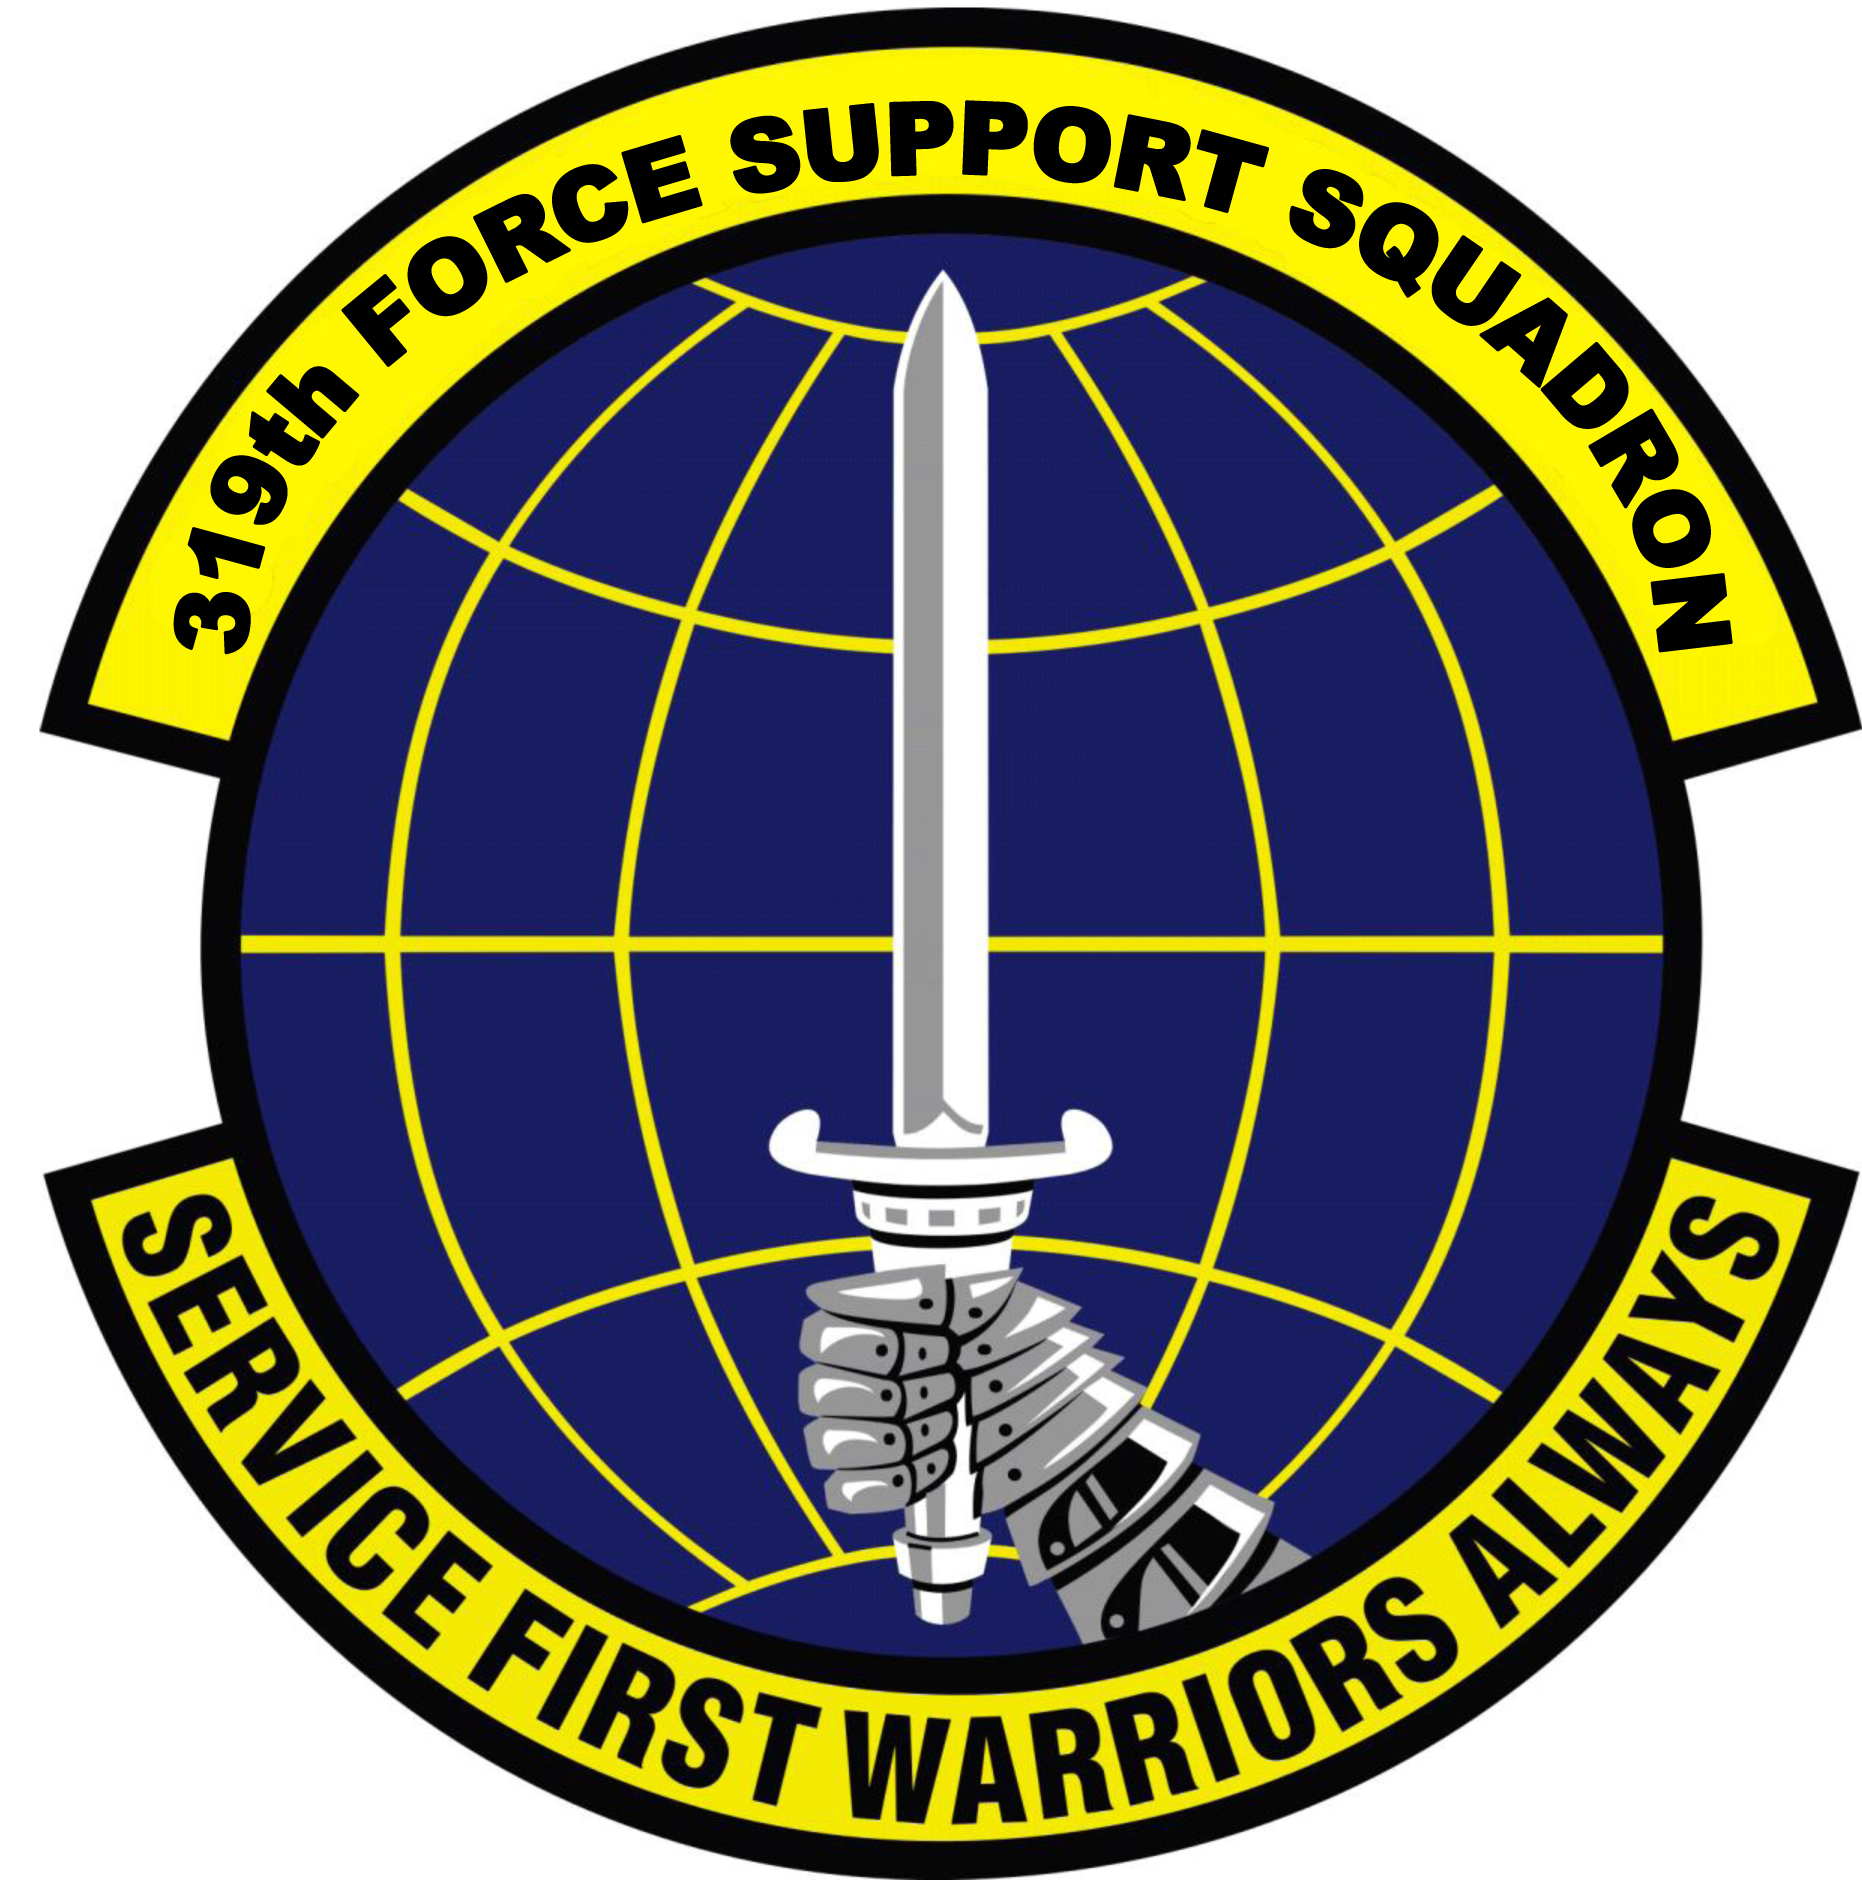 This is an image of the 319th Force Support Squadron seal.